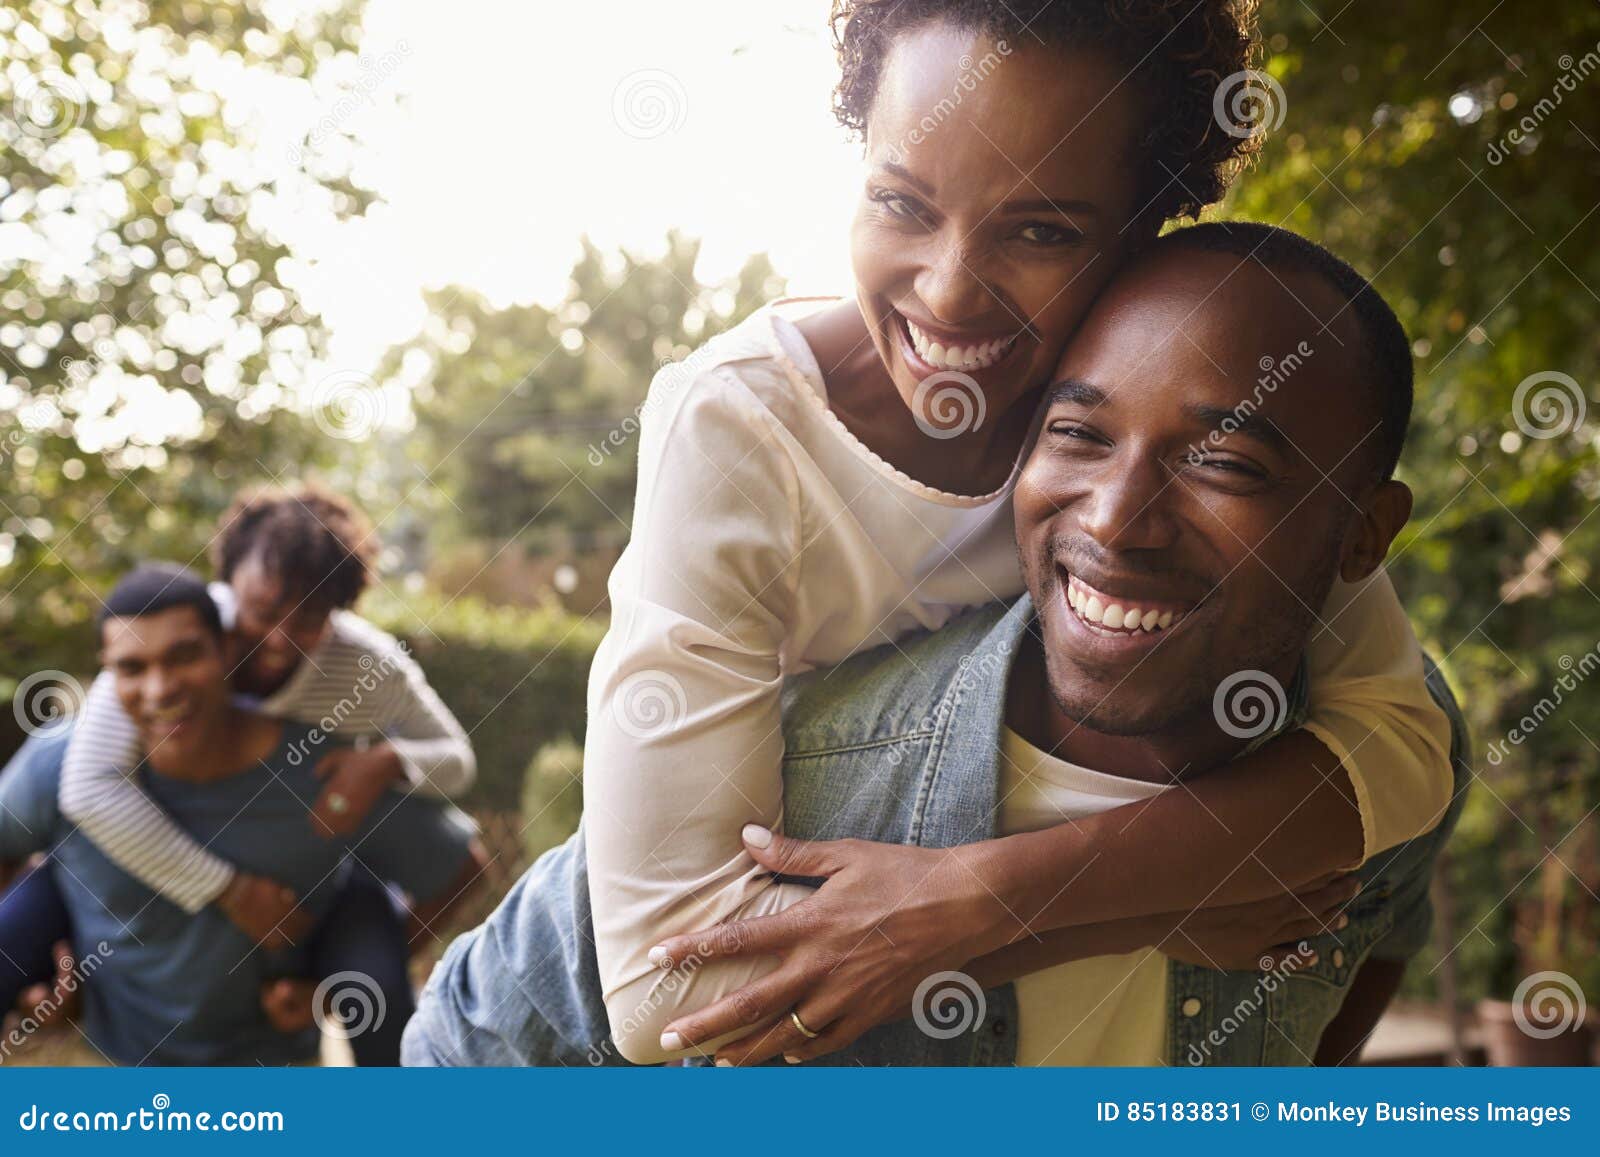 two young adult black couples piggybacking look to camera